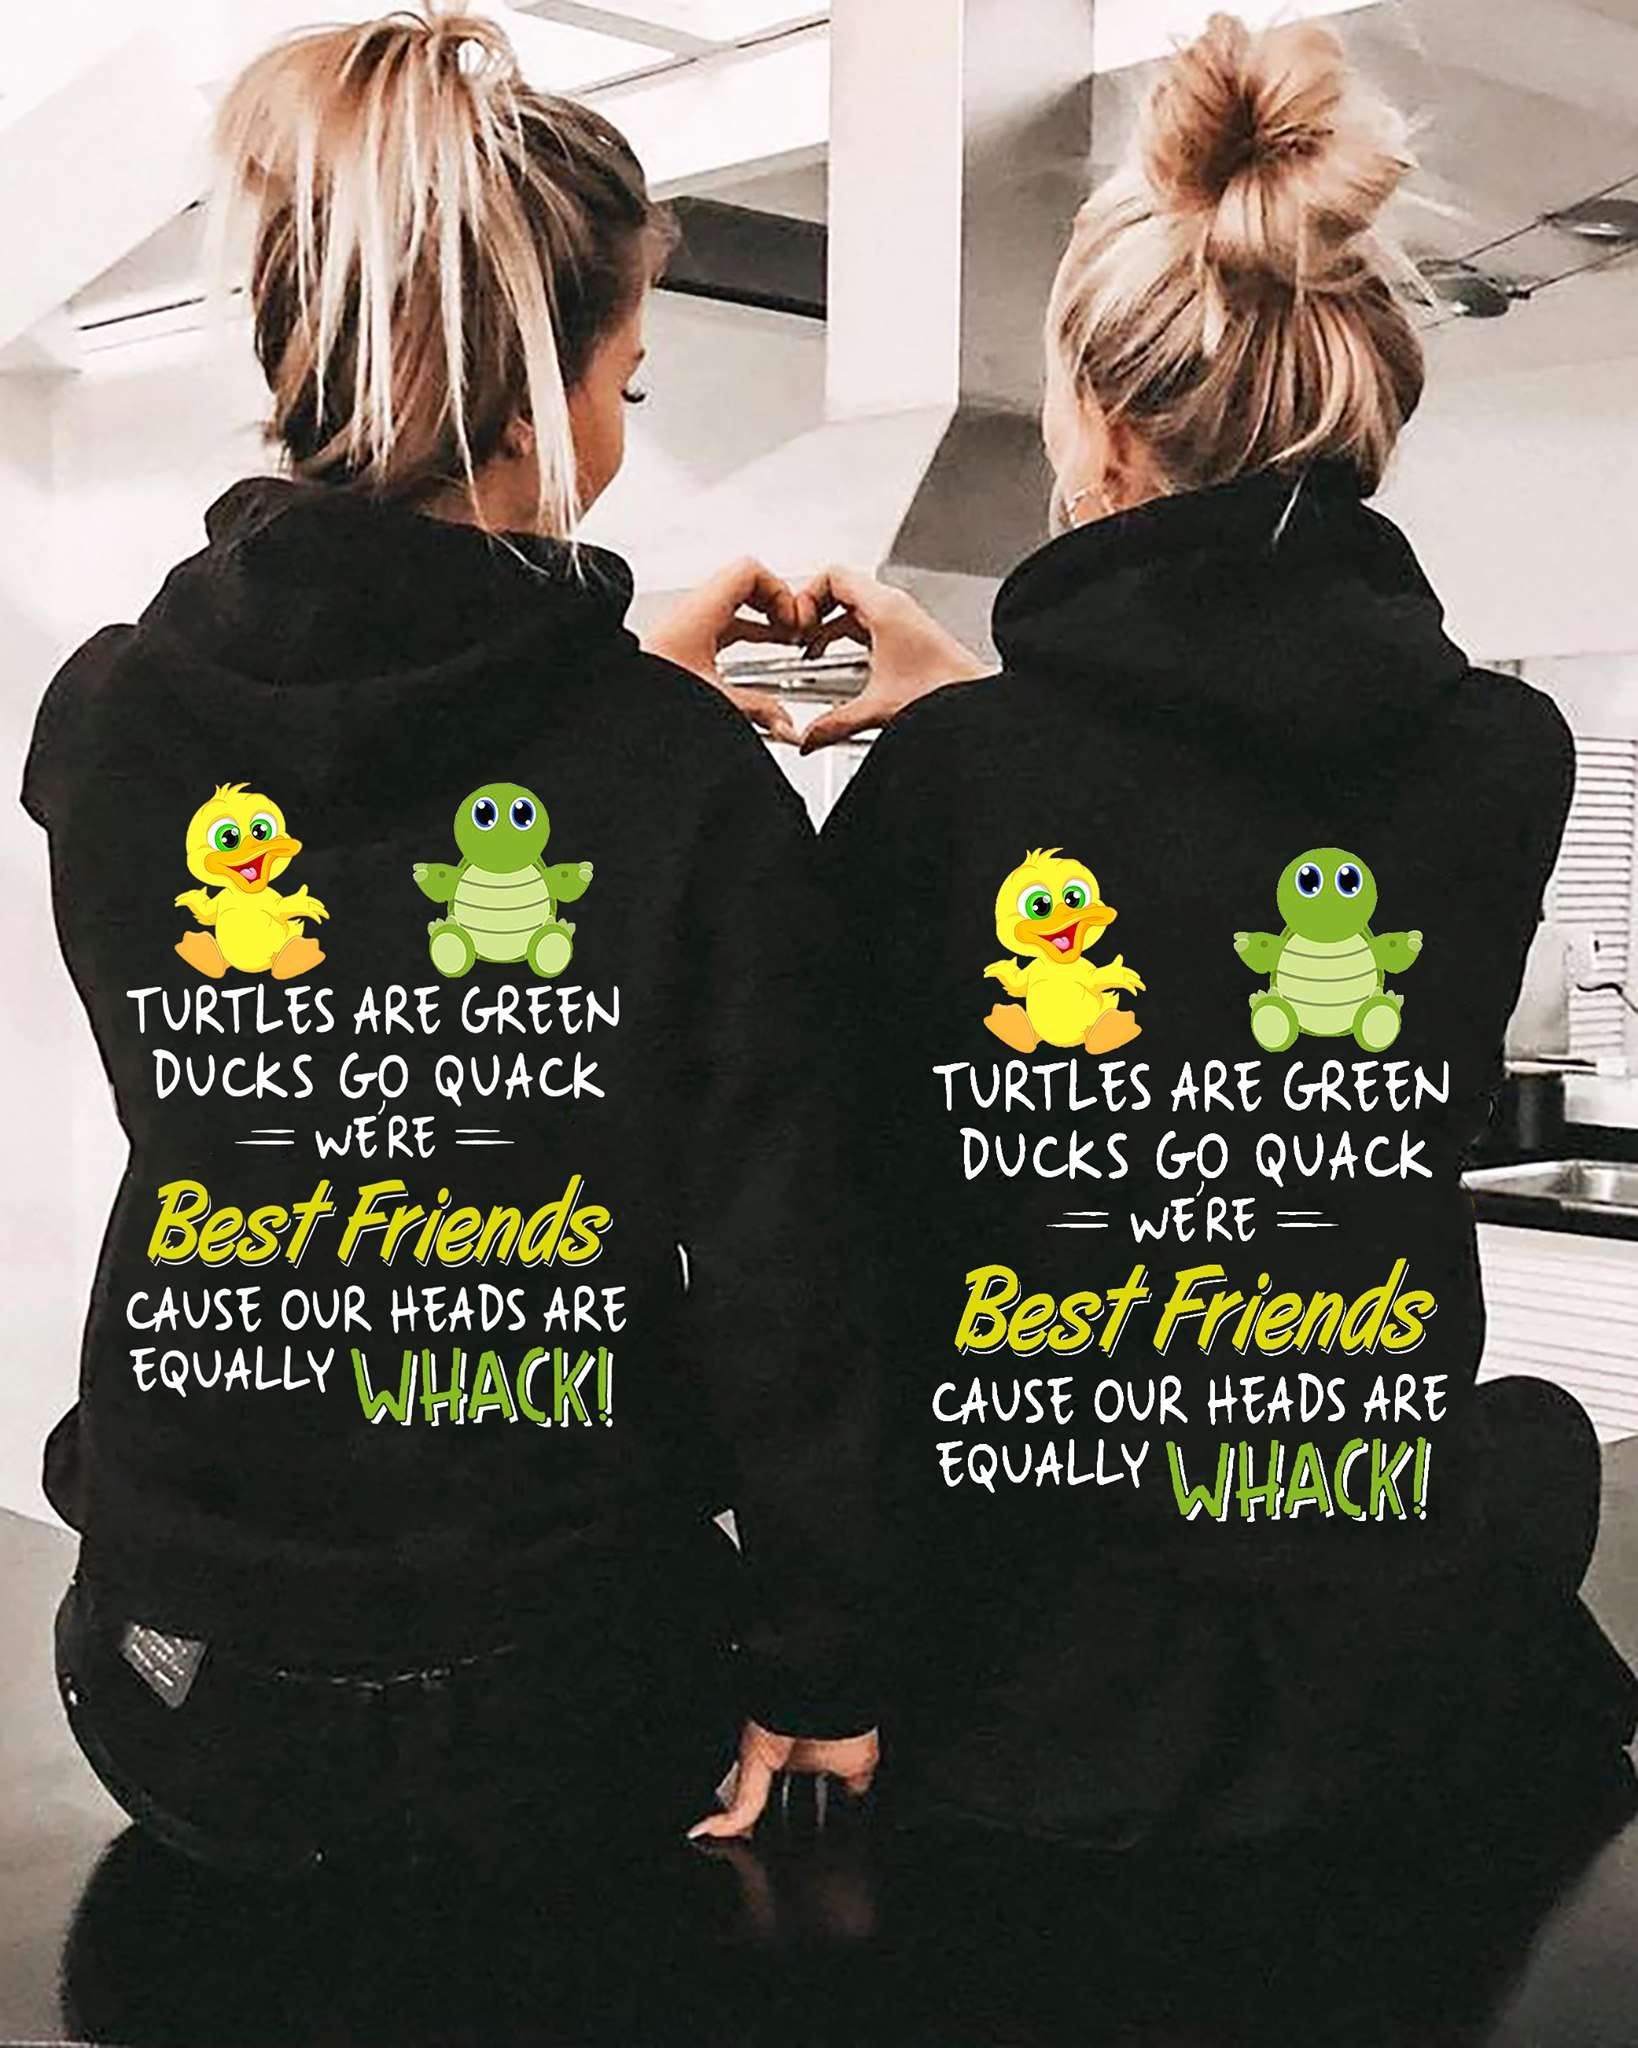 Turtles are green, ducks go quack - Gift for best friends